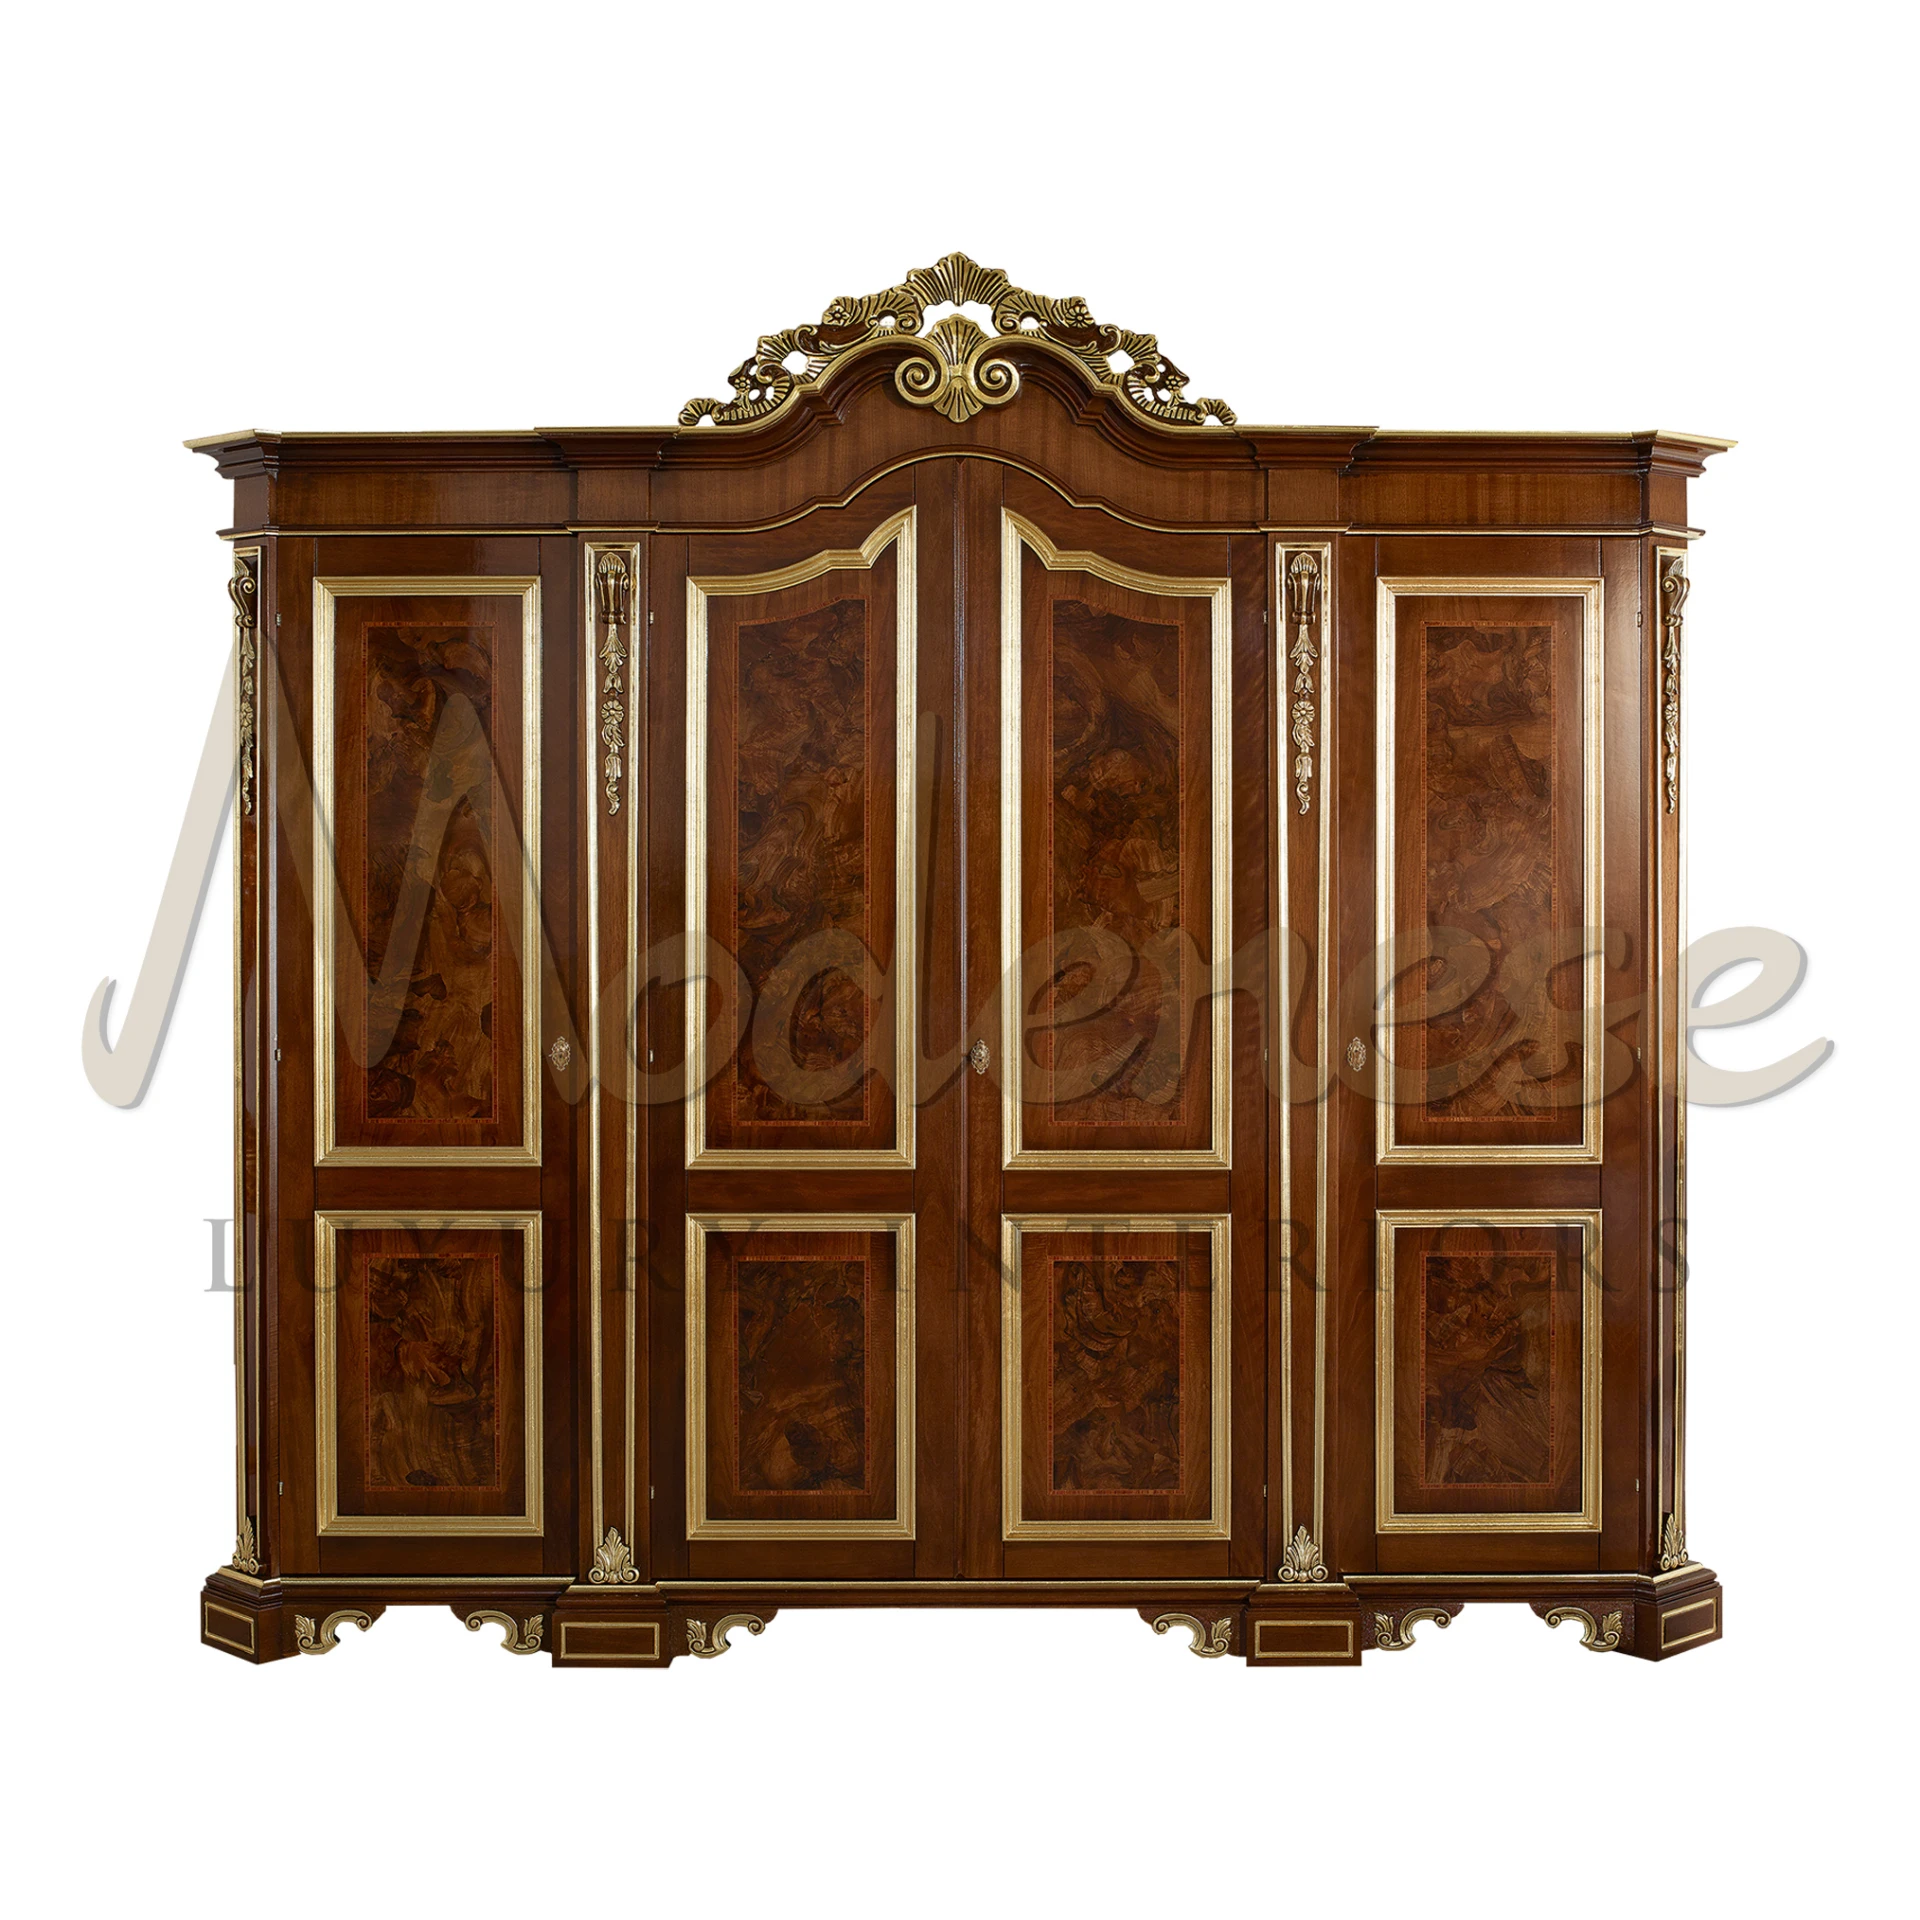 Majestic antique wooden wardrobe with ornate gold accents and burl wood panels created by Modenese Luxury Furniture                                                                                     